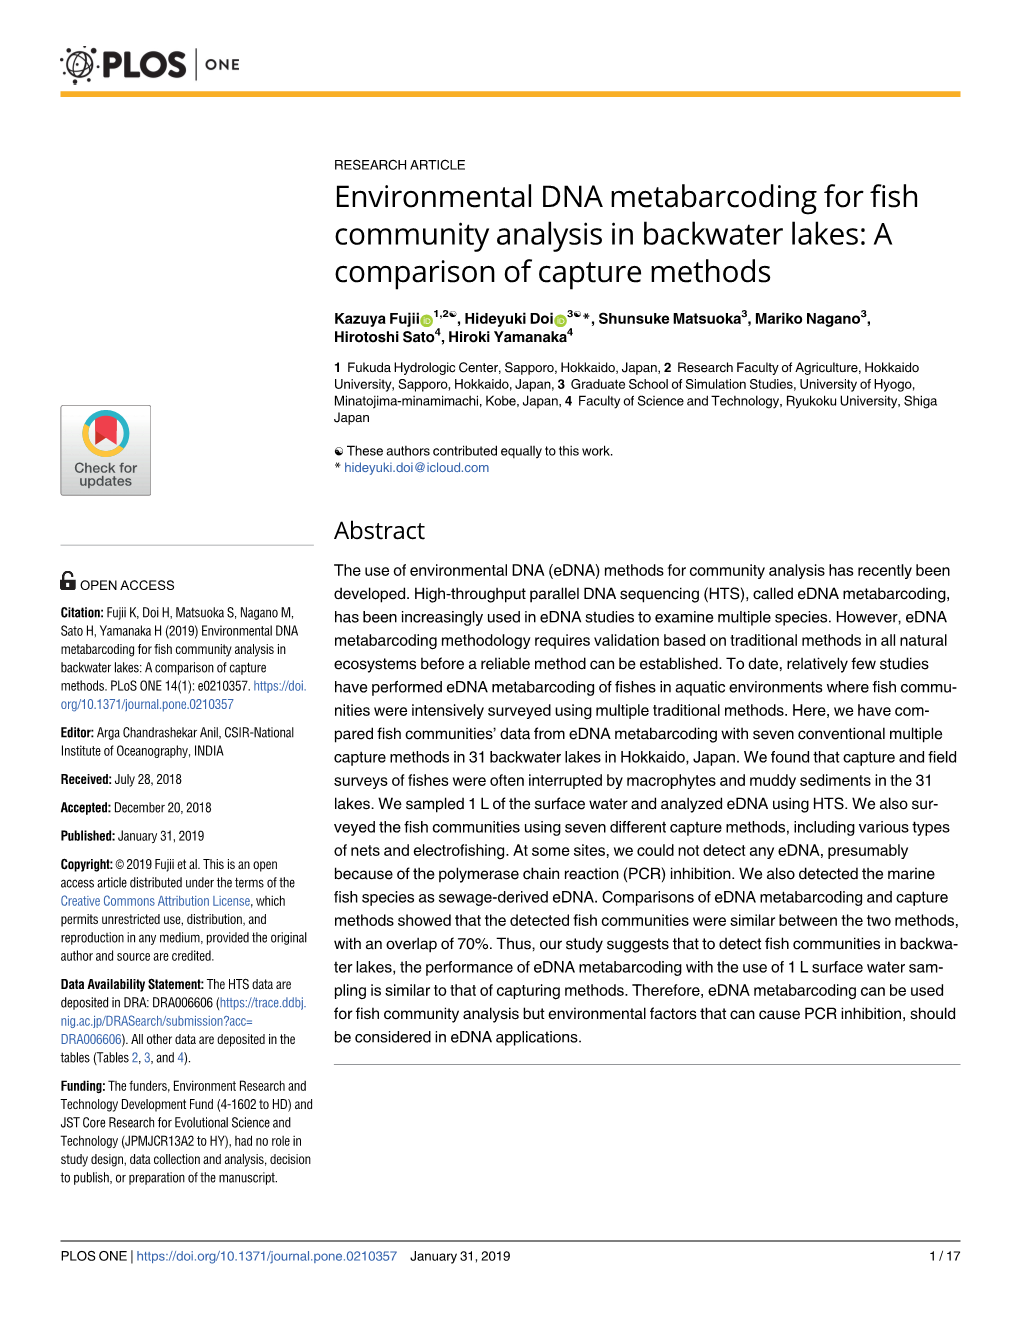 Environmental DNA Metabarcoding for Fish Community Analysis in Backwater Lakes: a Comparison of Capture Methods